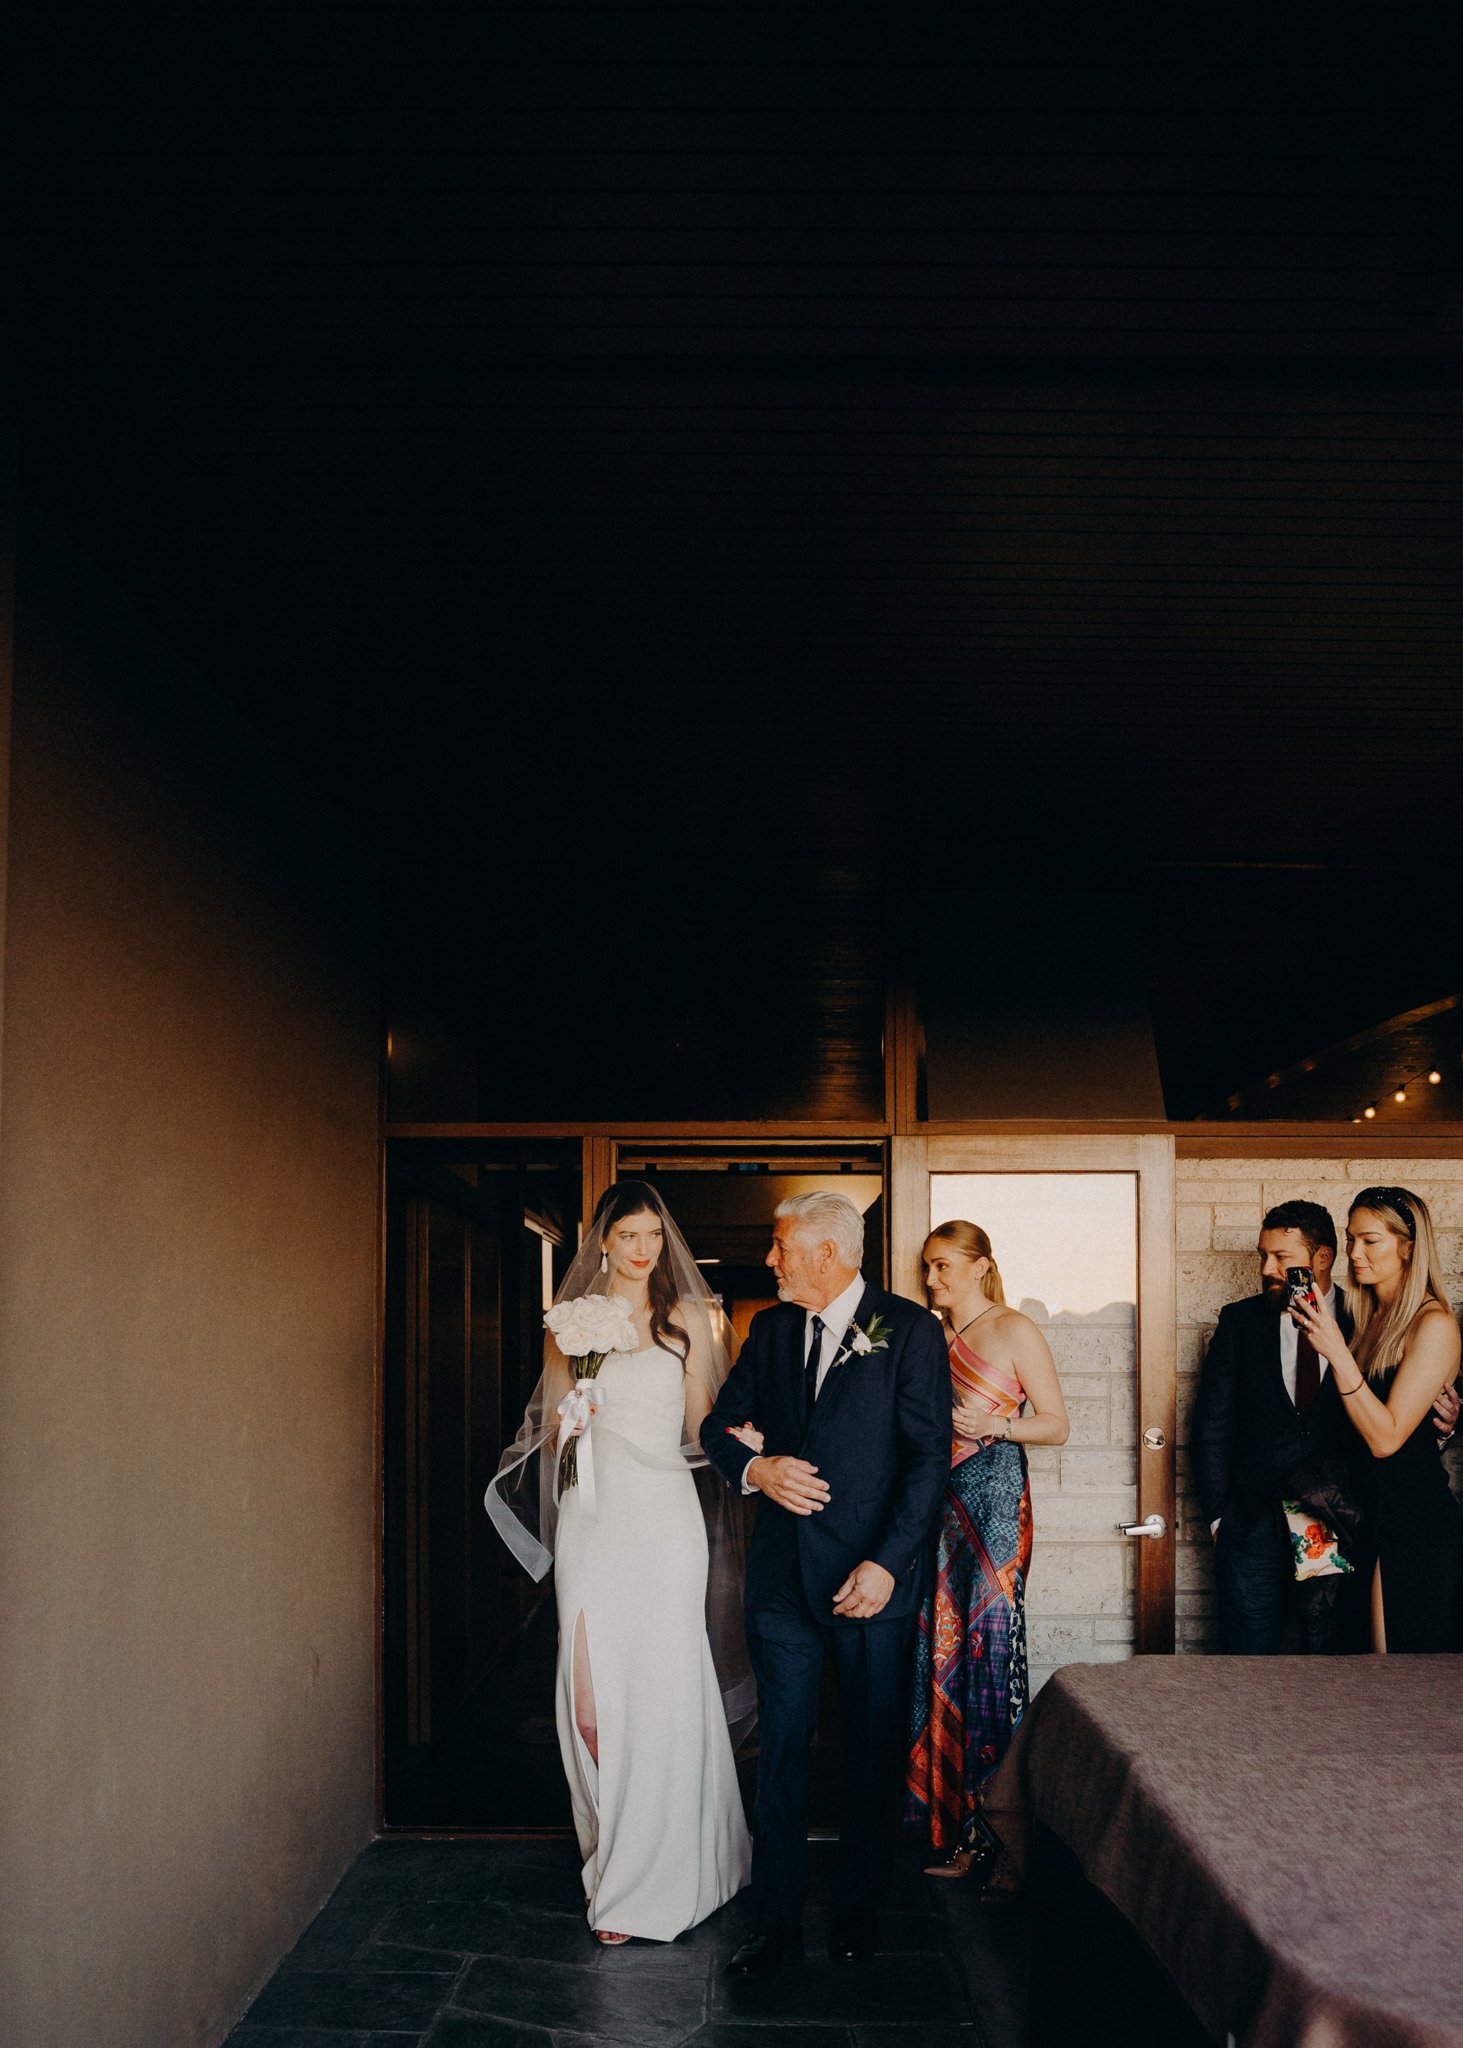 union station home bound brewery wedding - wedding photographers in los angeles - itlaphoto.com-75.jpg